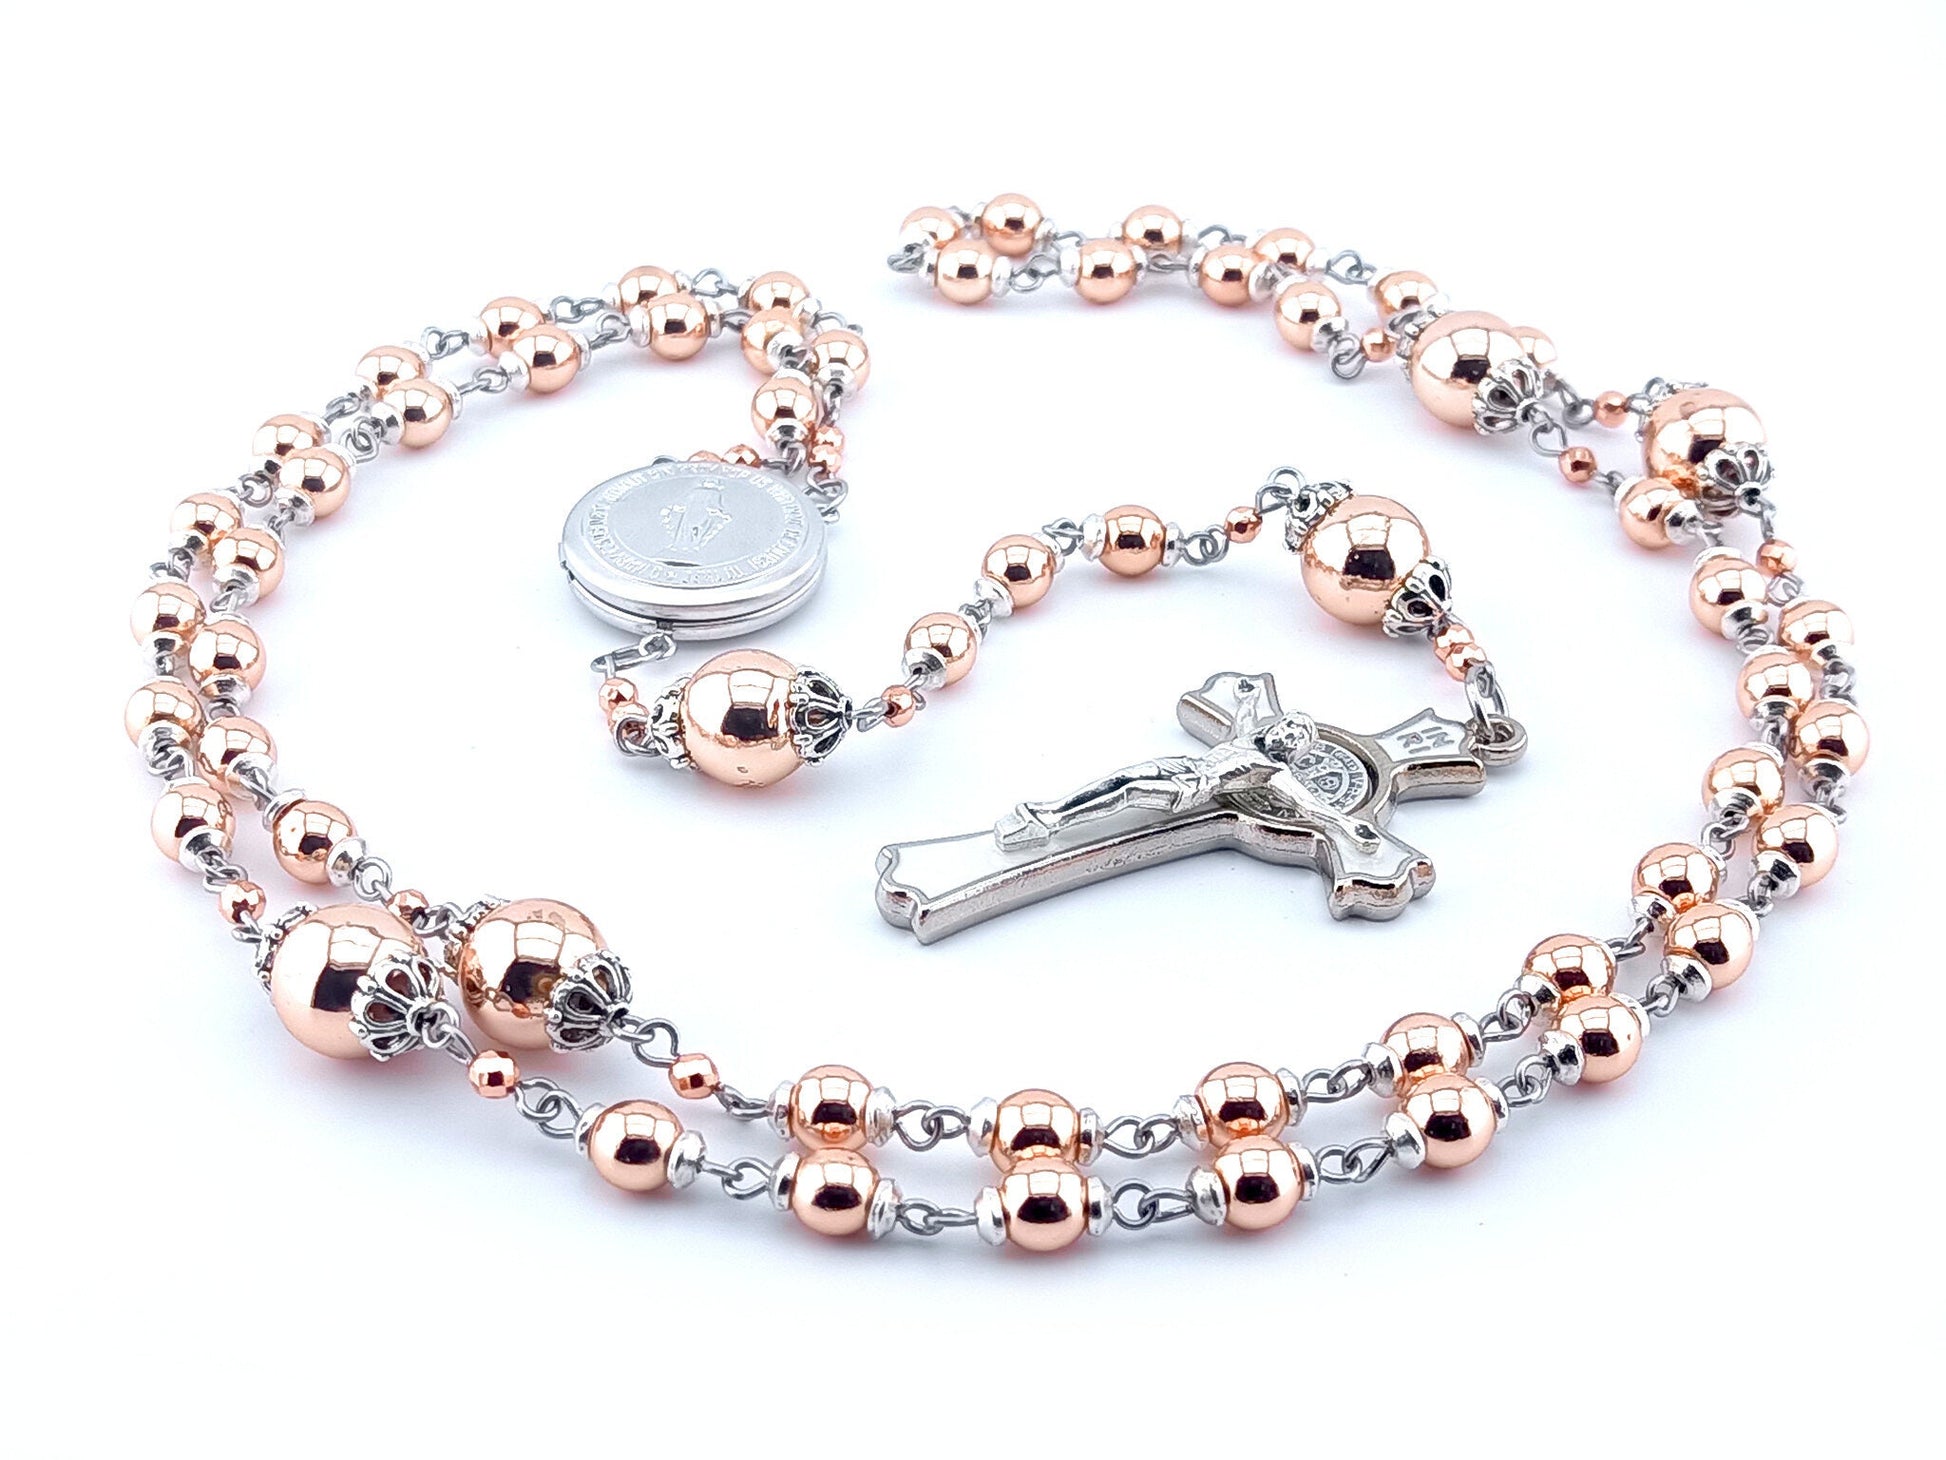 Miraculous medal locket unique rosary beads with rose gold hematite beads, silver and white enamel Saint Benedict crucifix, silver miraculous medal locket centre medal.